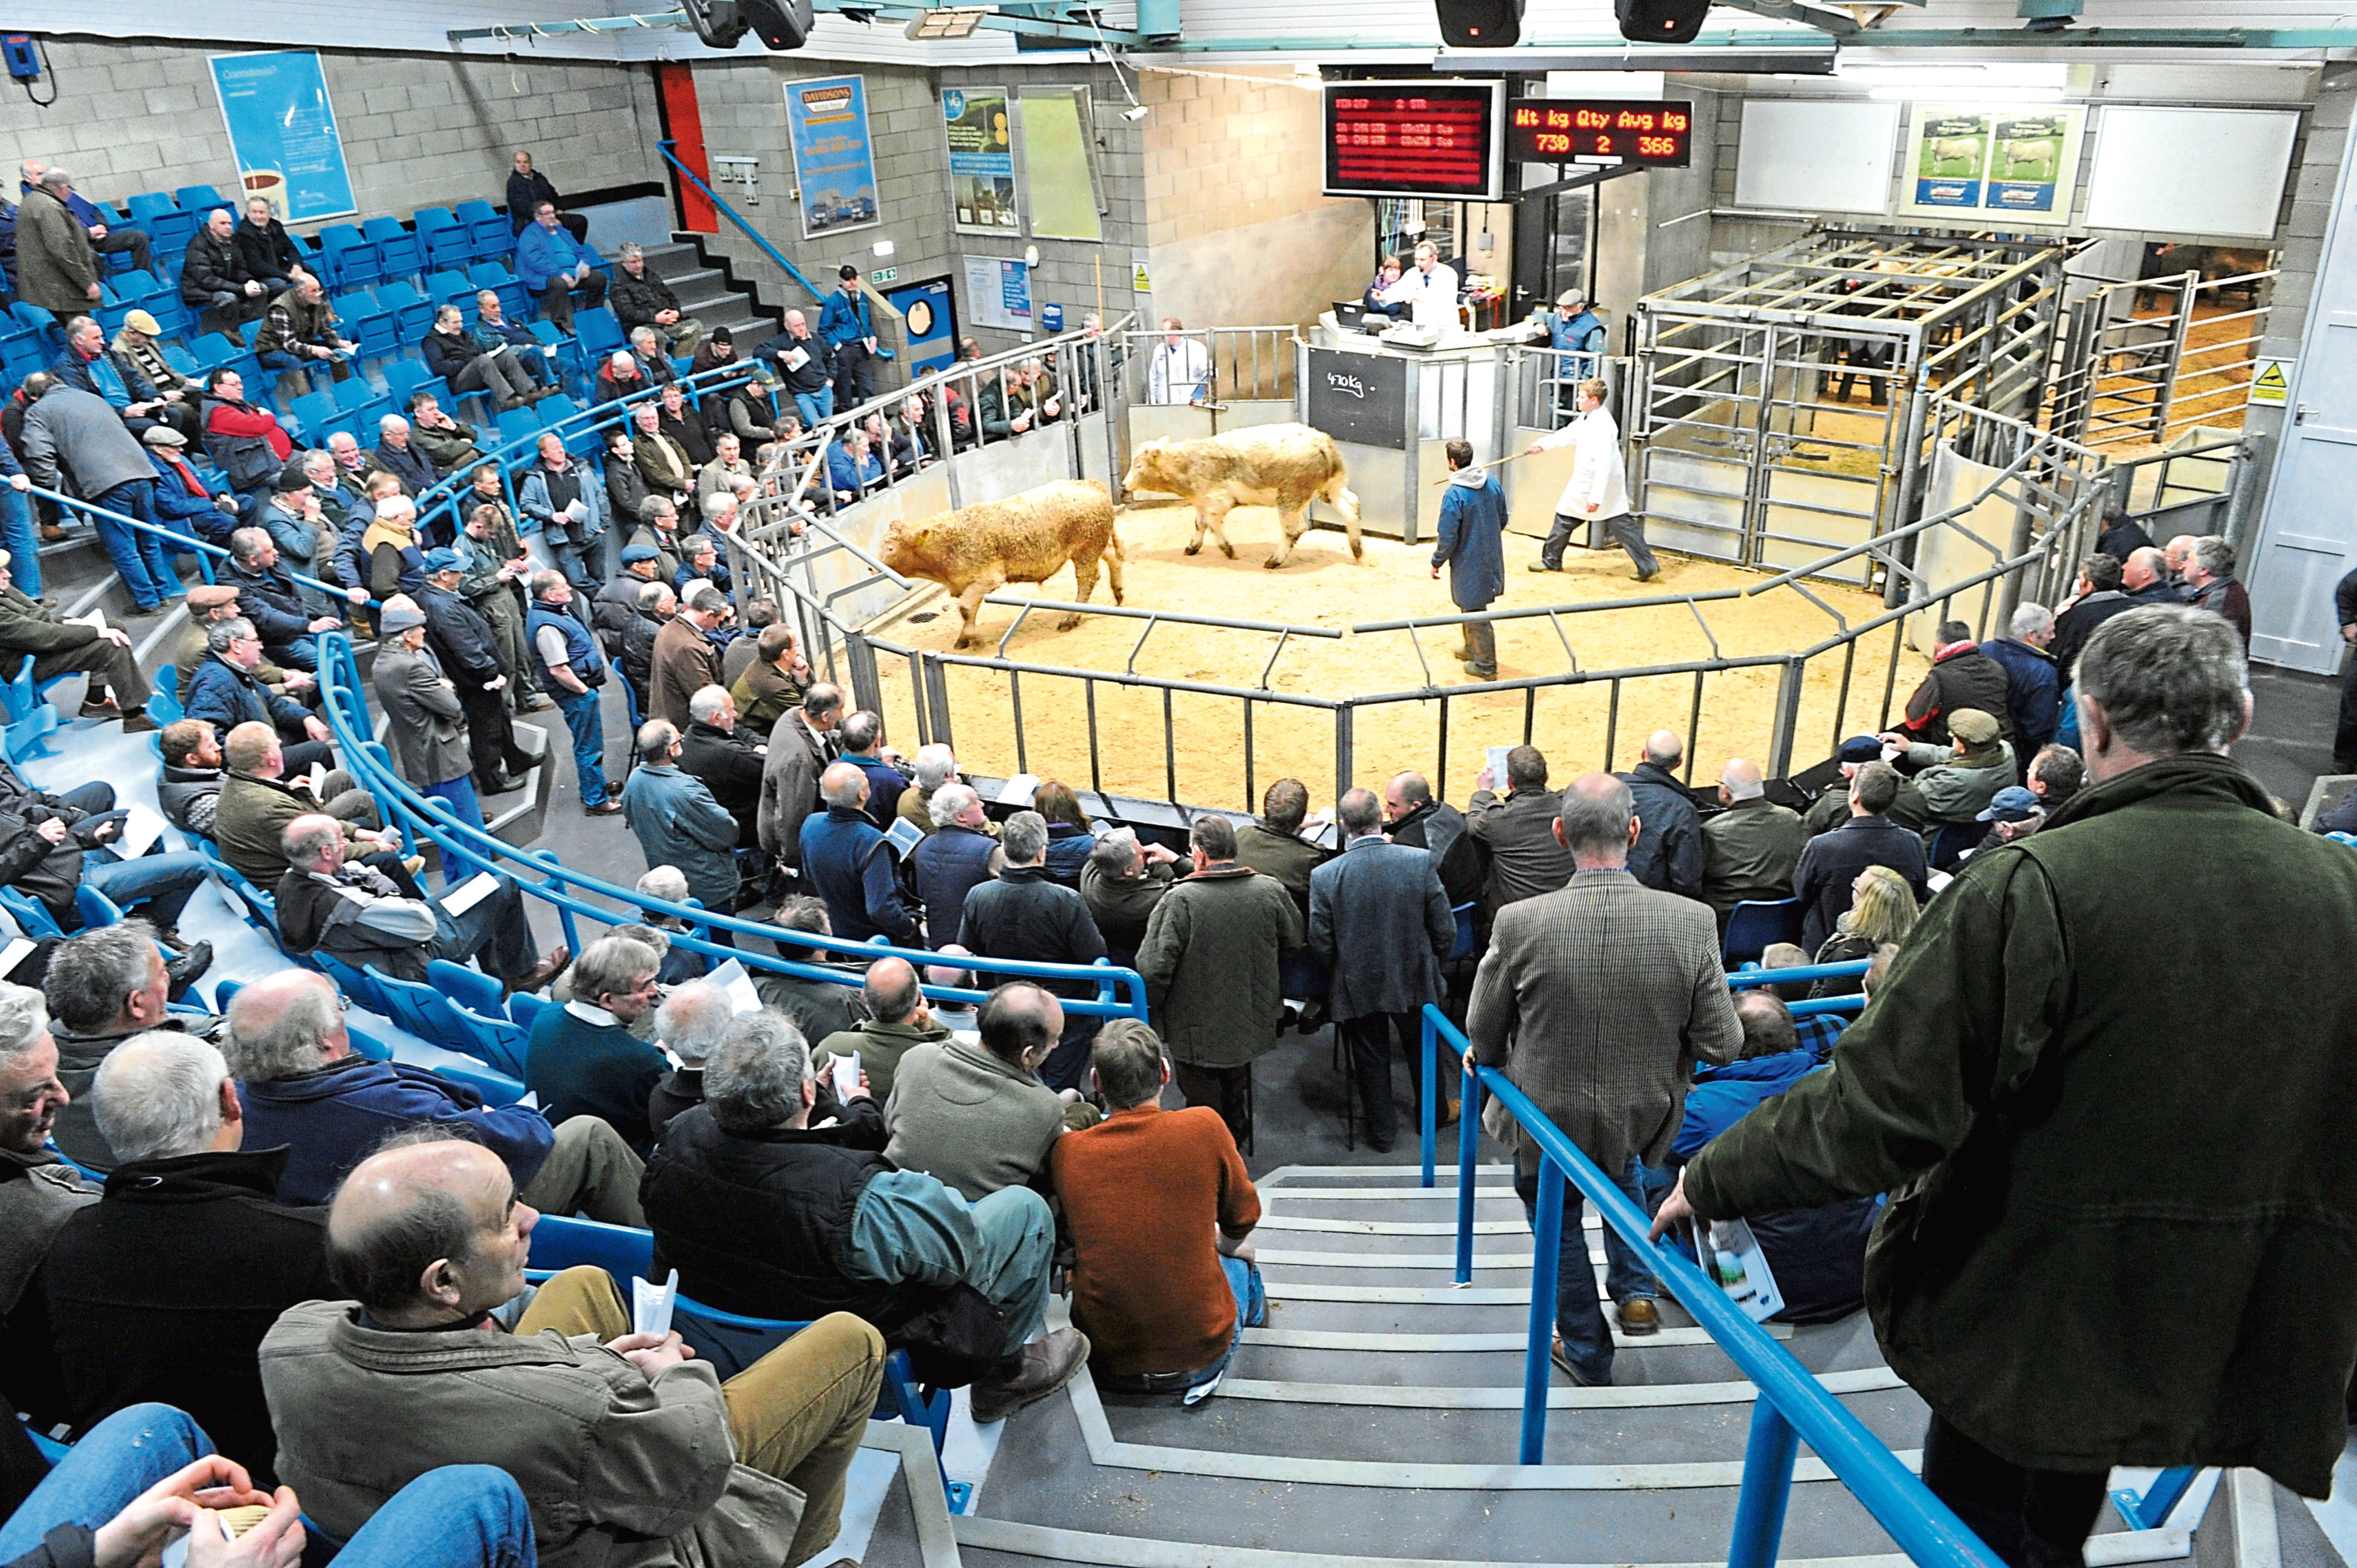 The study is looking for views on livestock auction marts across the UK.